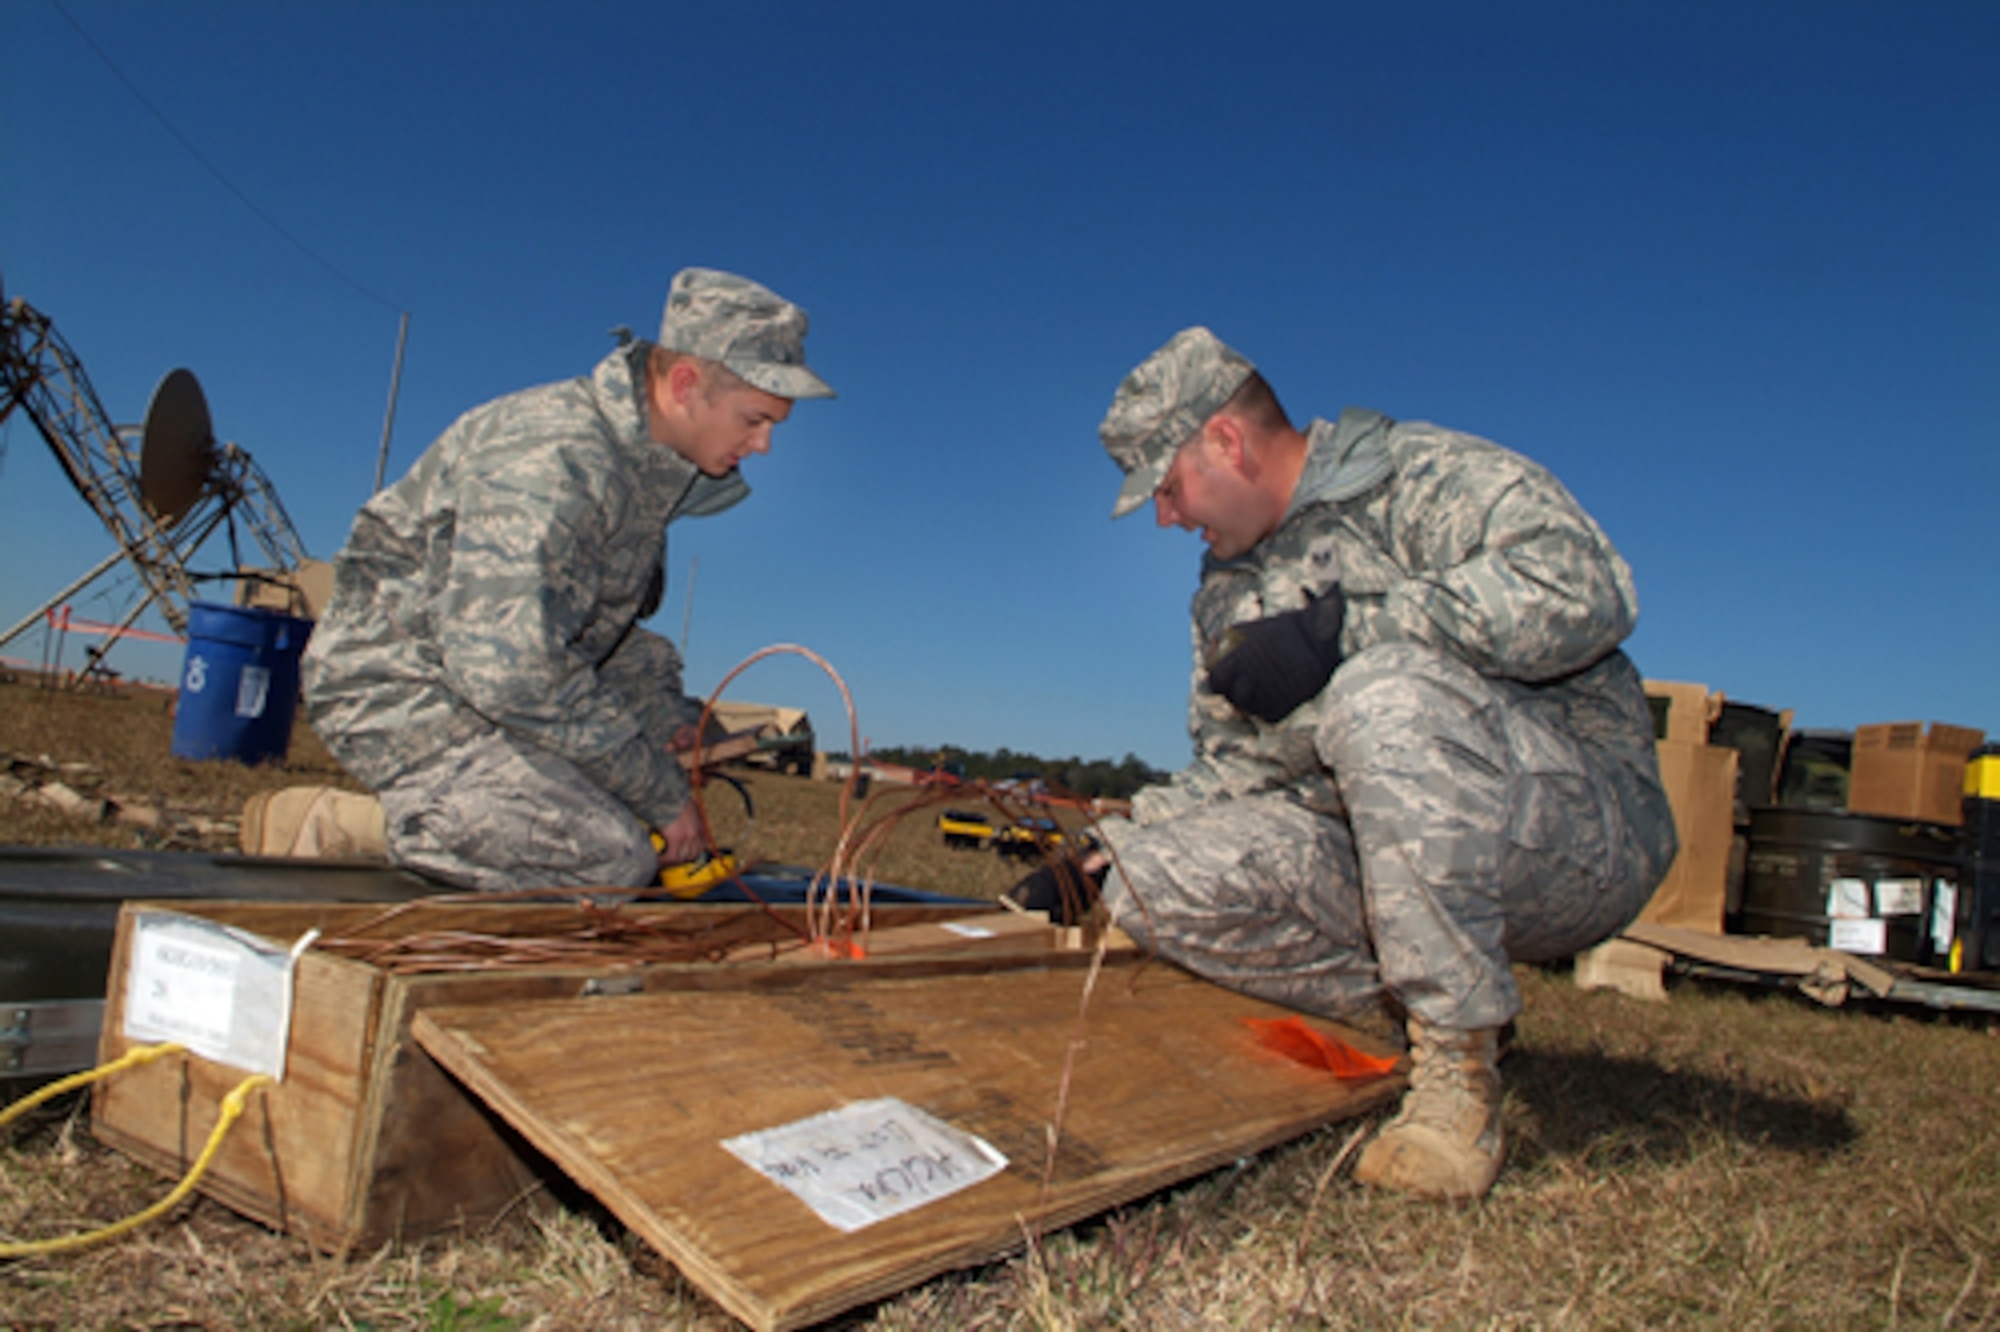 Airman 1st Class David Hunstberger and Staff Sgt. Trent Lundell, both with the 54th CBCS, open a grounding kit used to protect equipment from electrical damage. U.S. Air Force photo by Tommie Horton